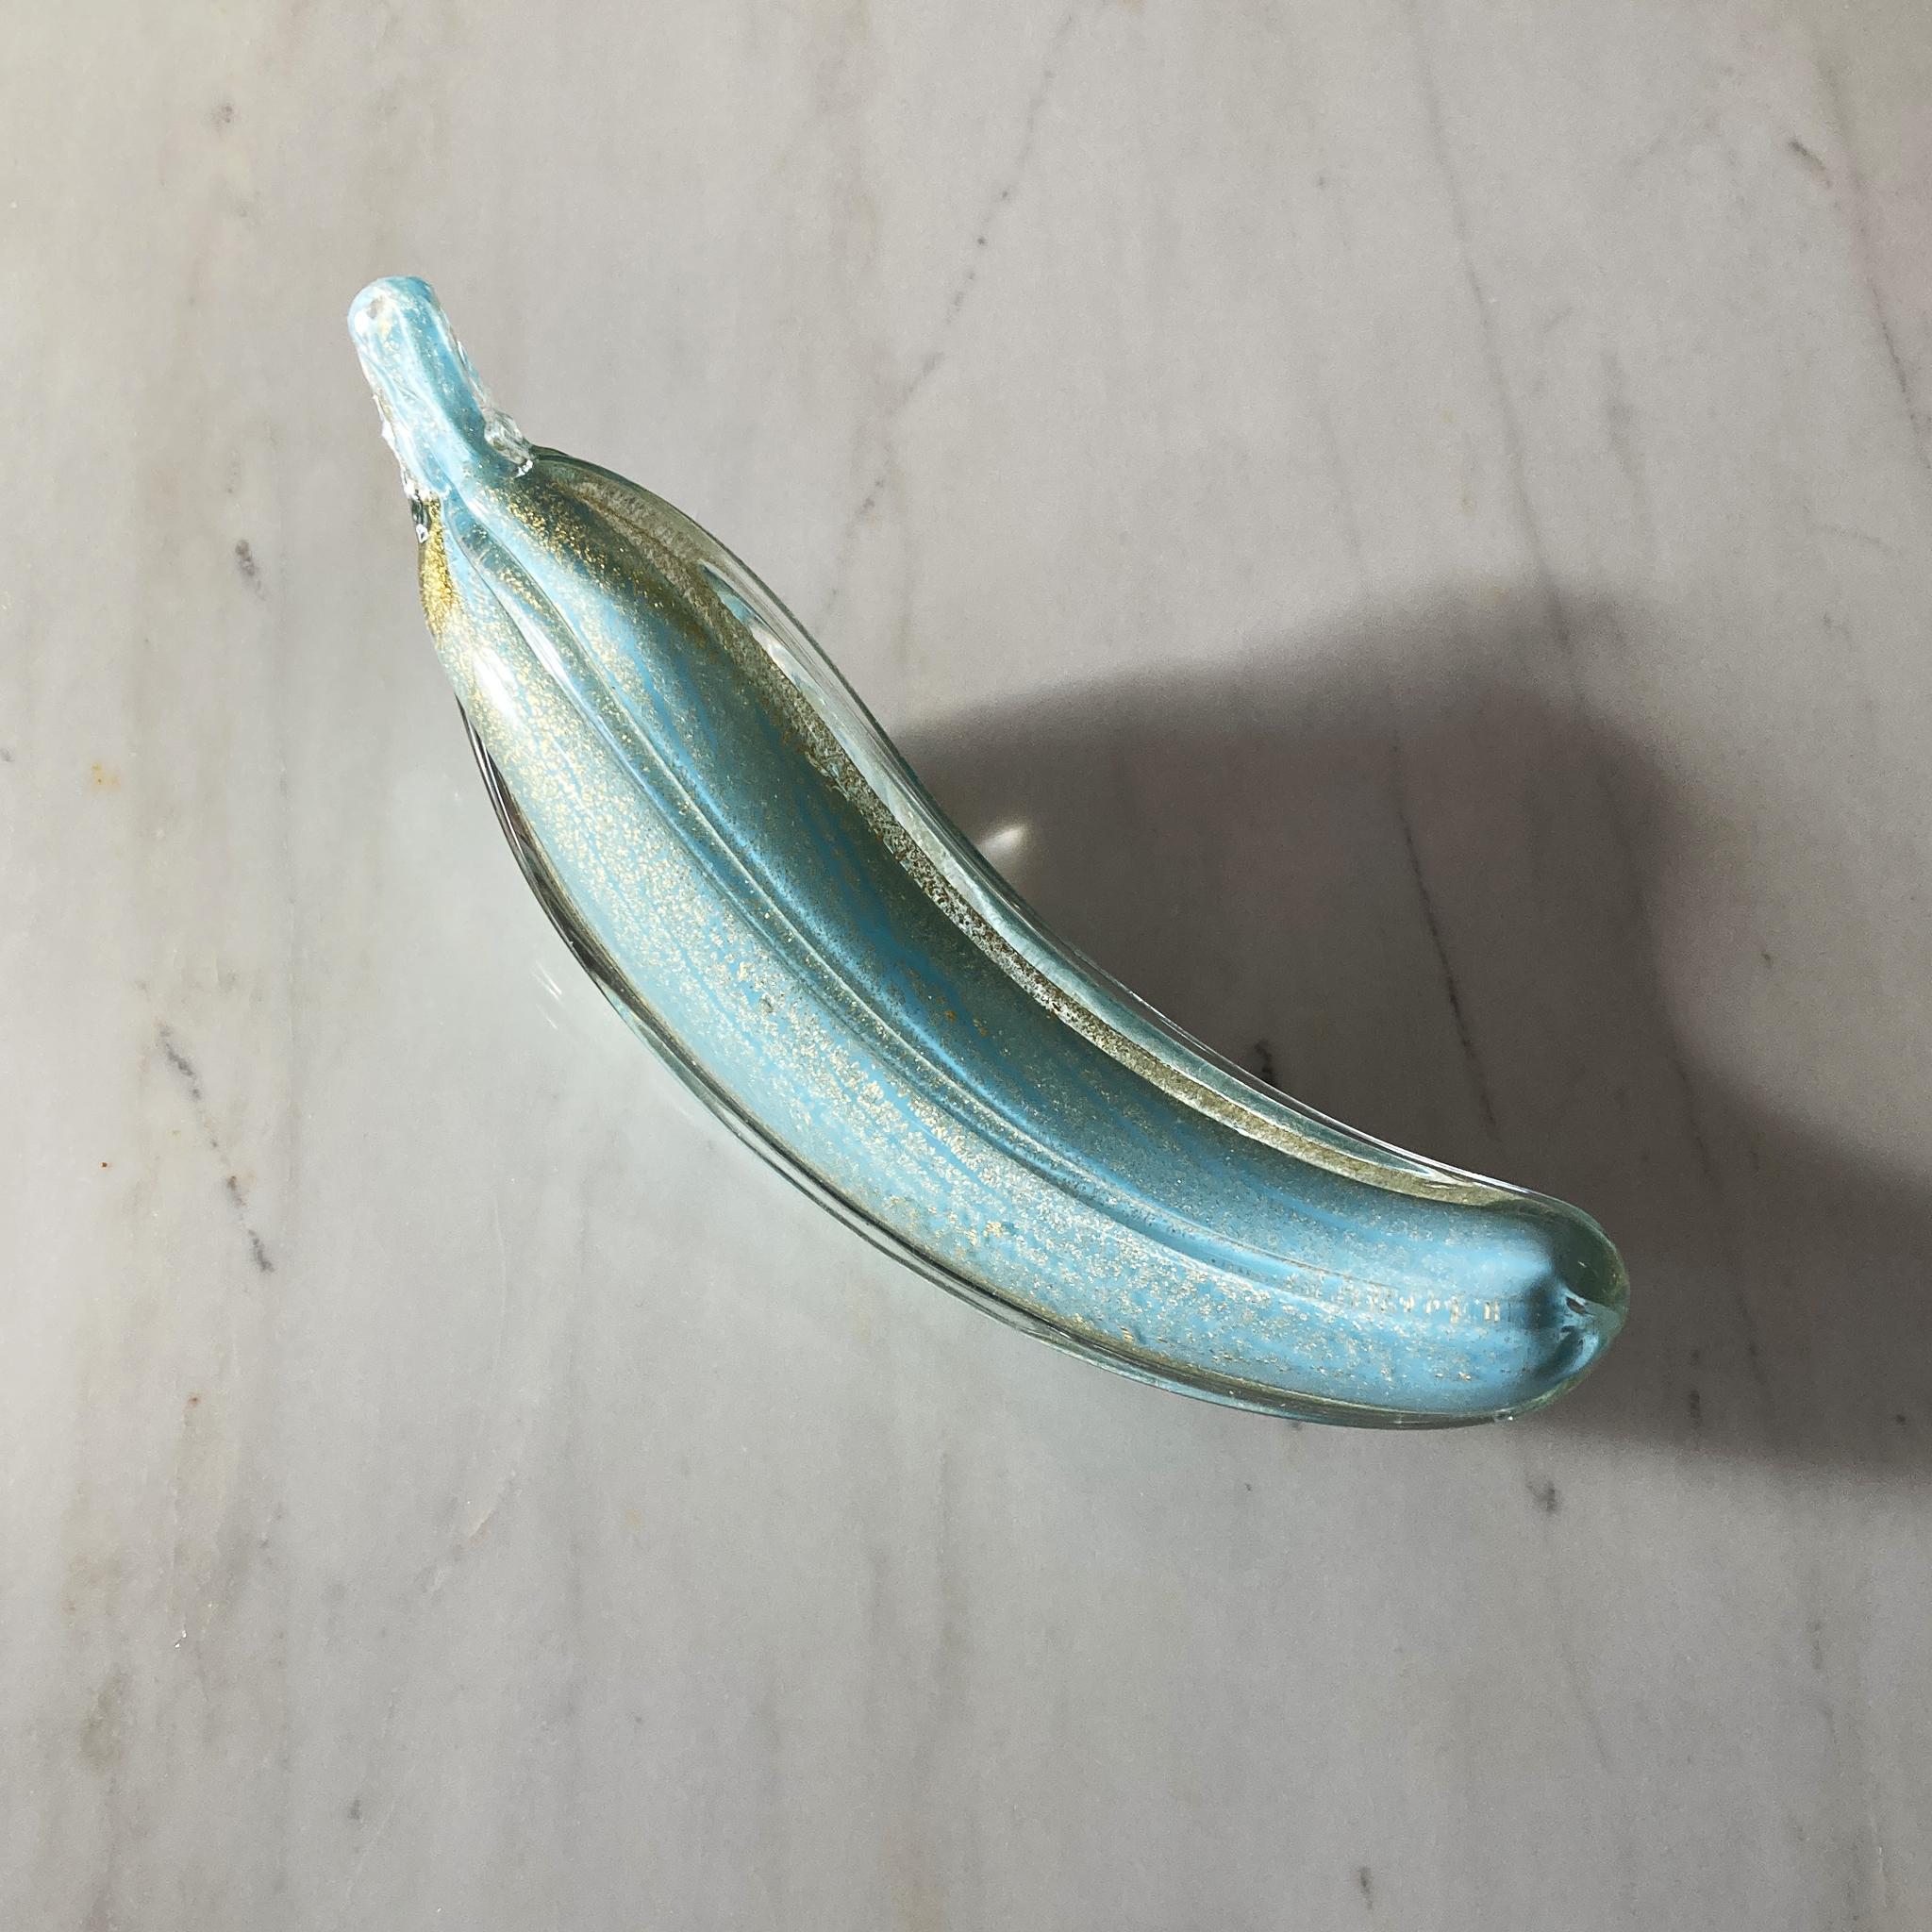 Stunning, unique Murano hand blown banana by Alfredo Barbini. Unique aqua glass is encased in gold, and clear glass. The glass glitters when the light hits this piece at different angles.

In very good vintage condition, a few small bubbles in